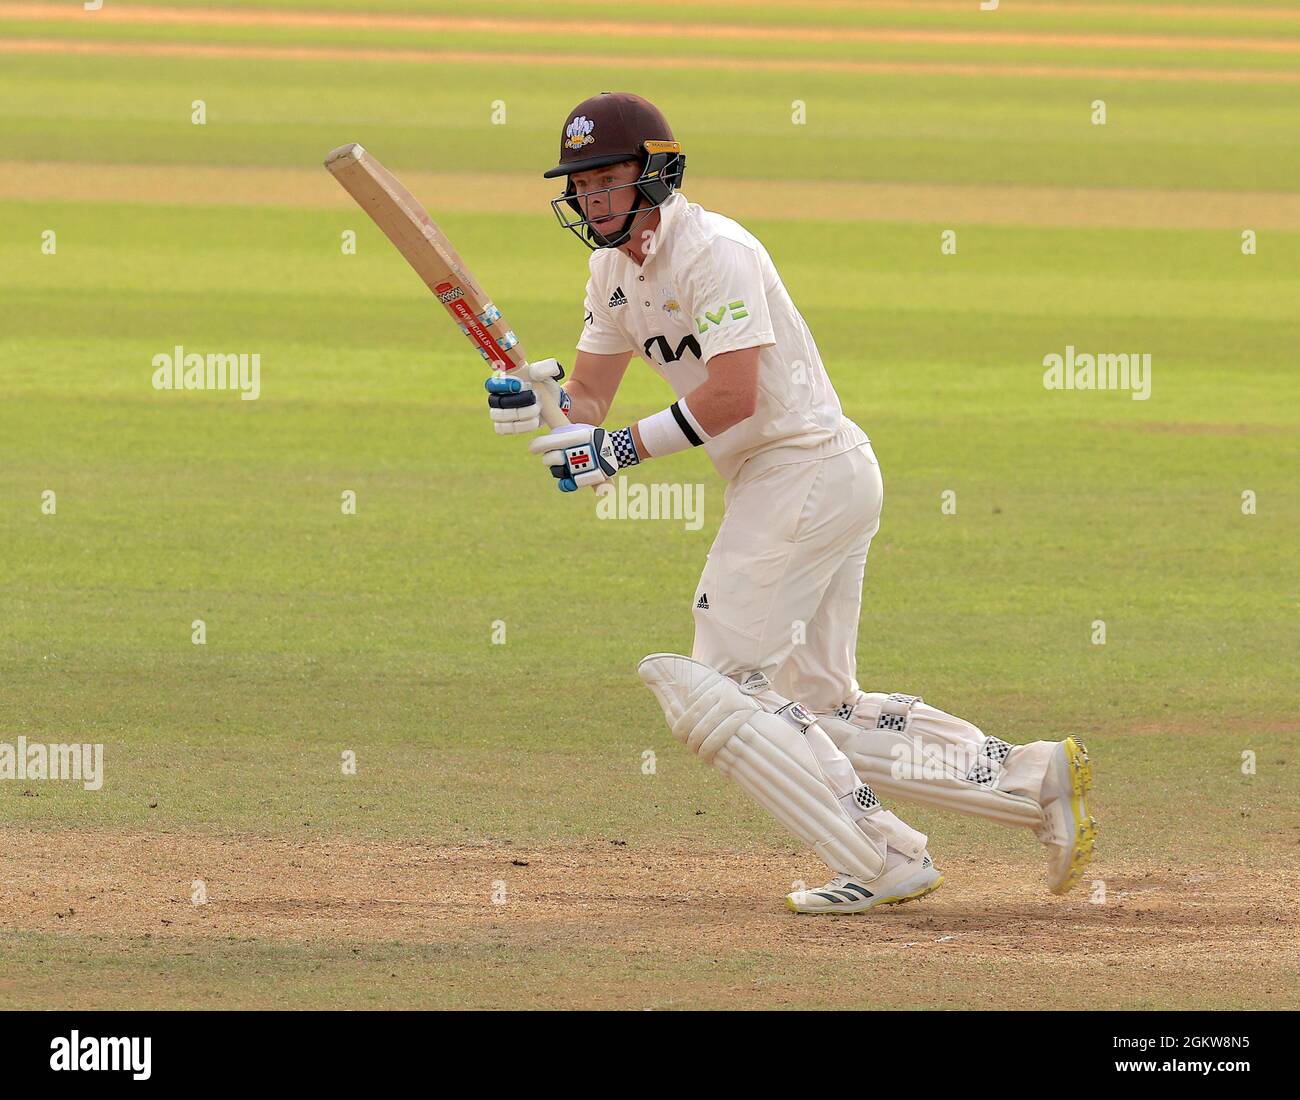 15 September, 2021. London, UK. Surrey’s Ollie Pope batting as Surrey take on Essex in the County Championship at the Kia Oval, day three David Rowe/Alamy Live News Stock Photo